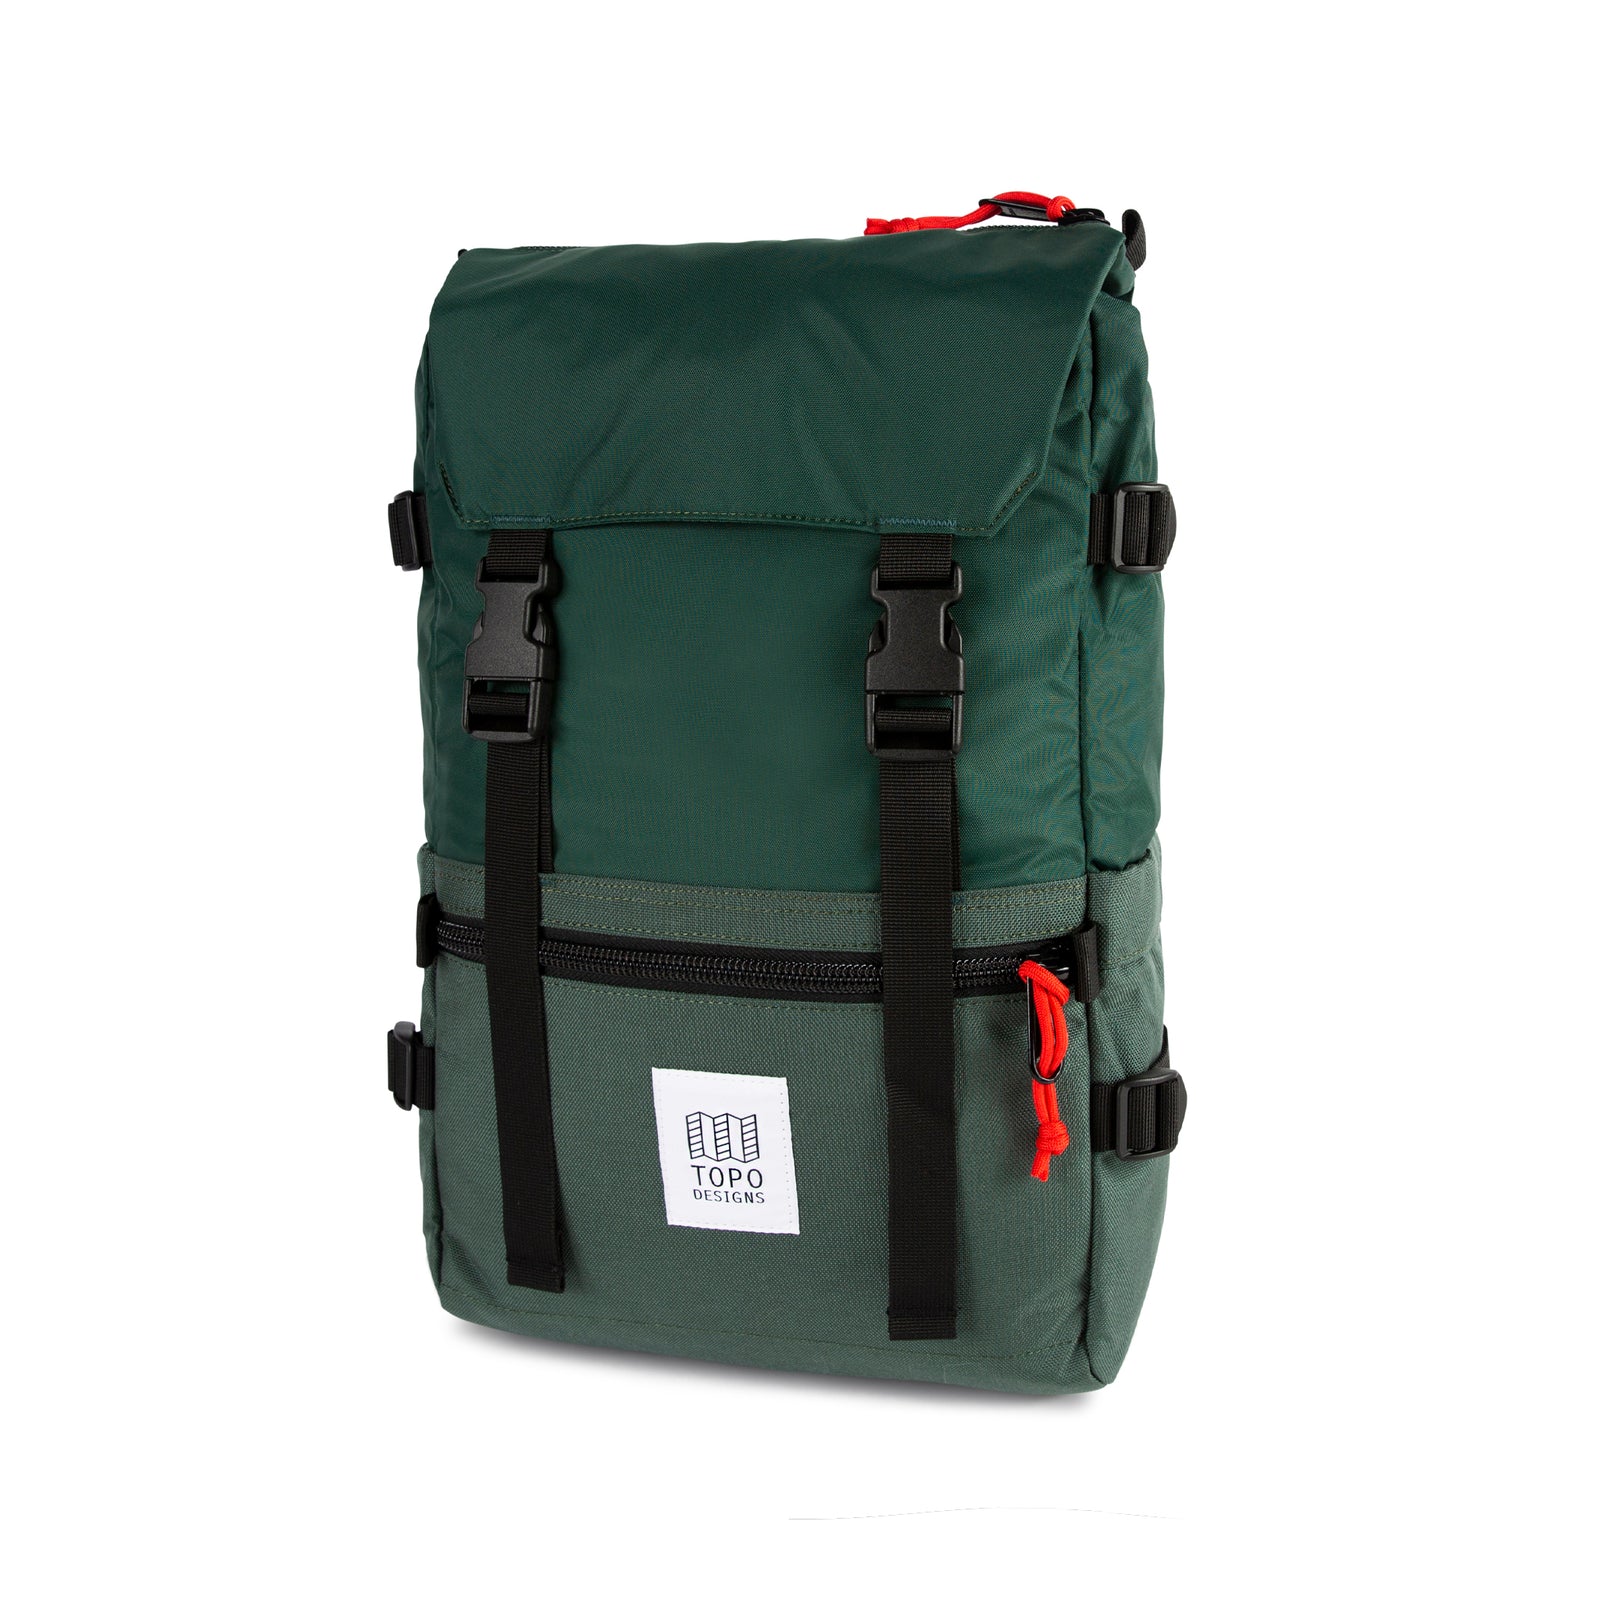 Topo Designs Rover Pack Classic laptop backpack in "Forest" green.